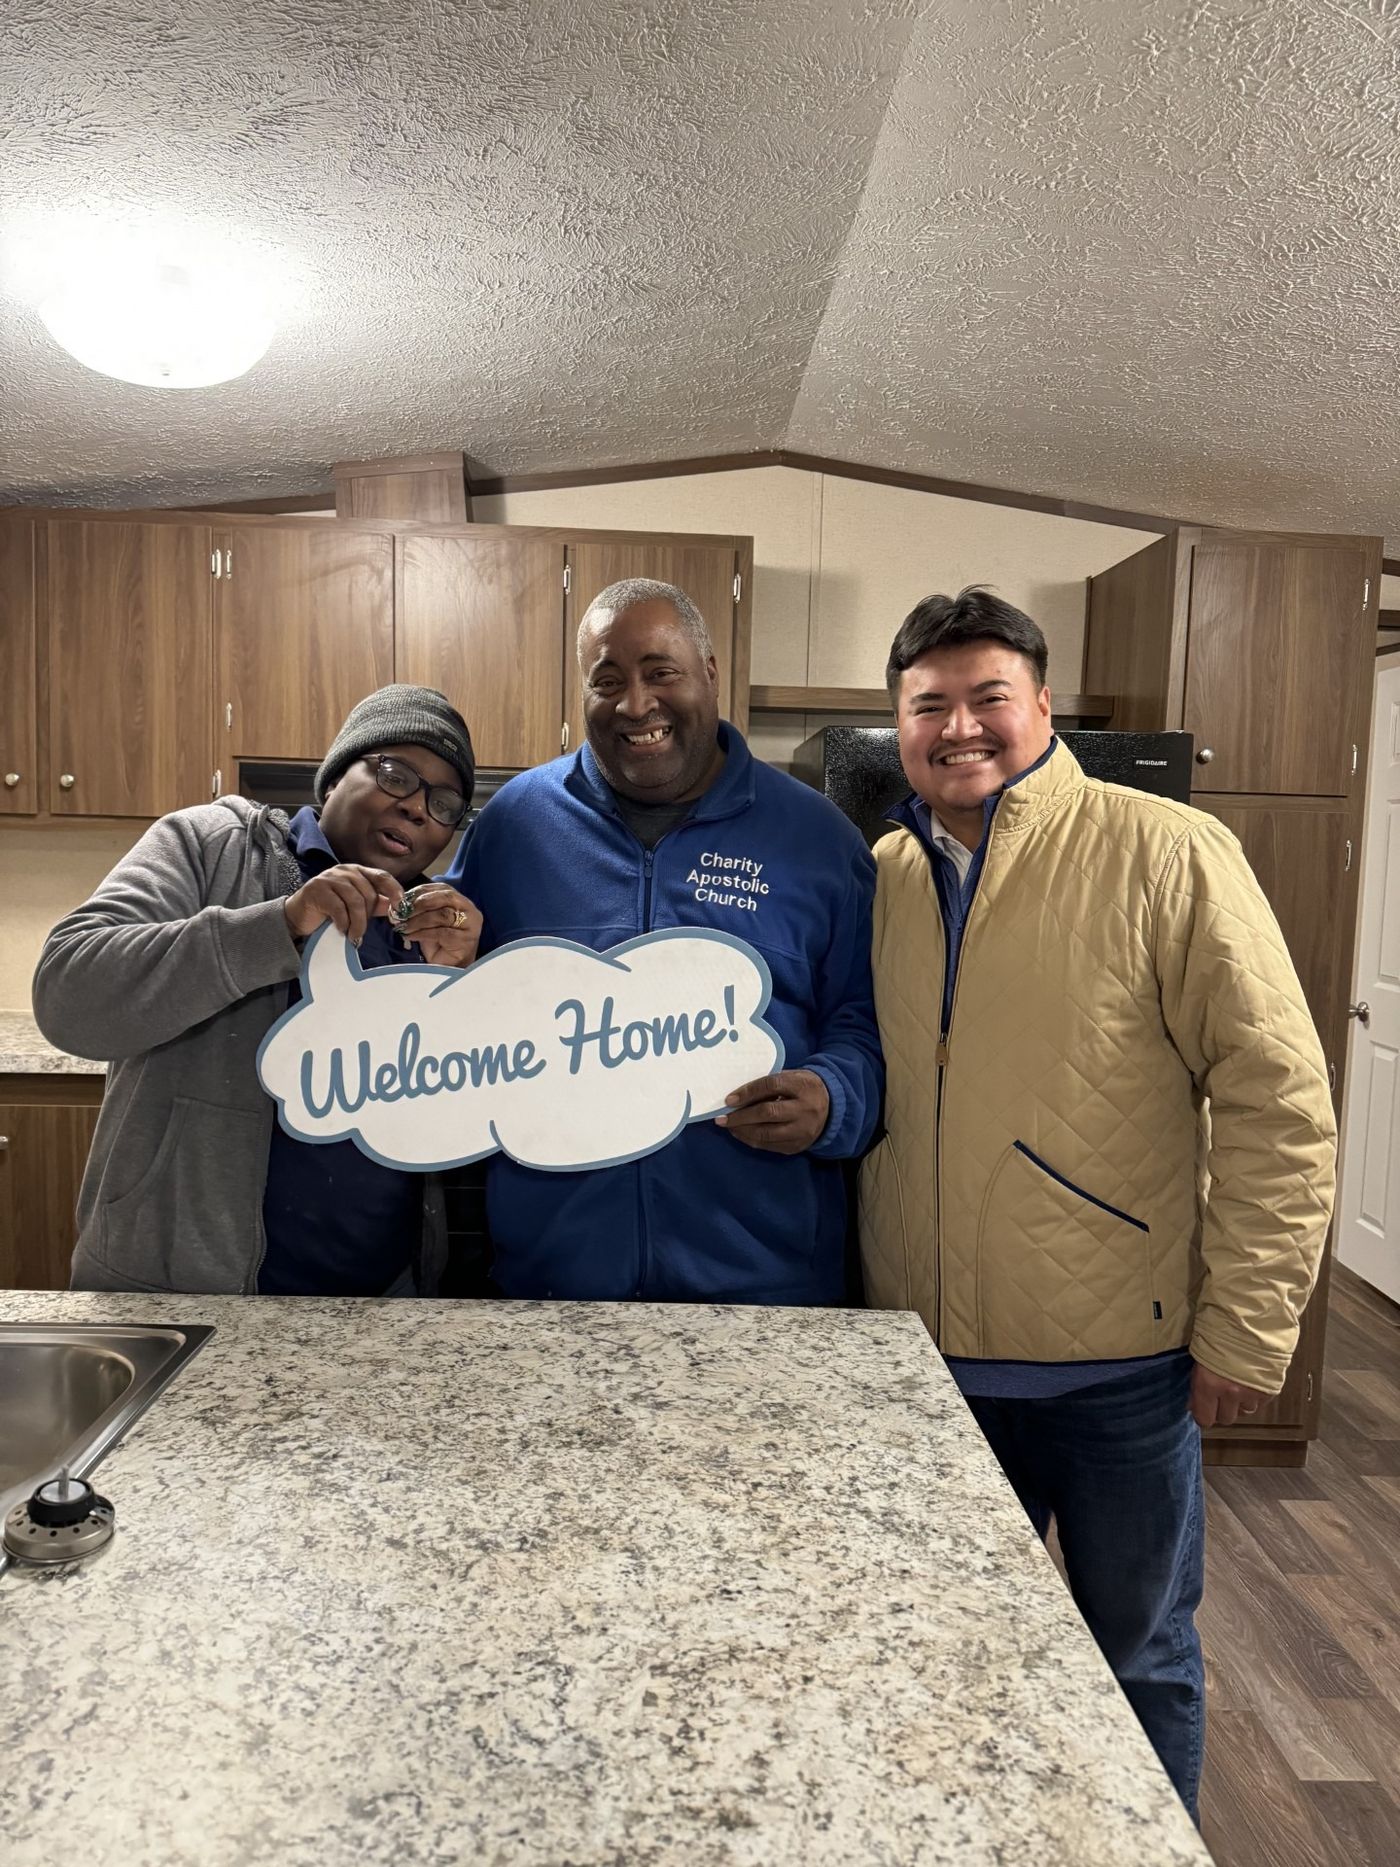 Ronald C. welcome home image